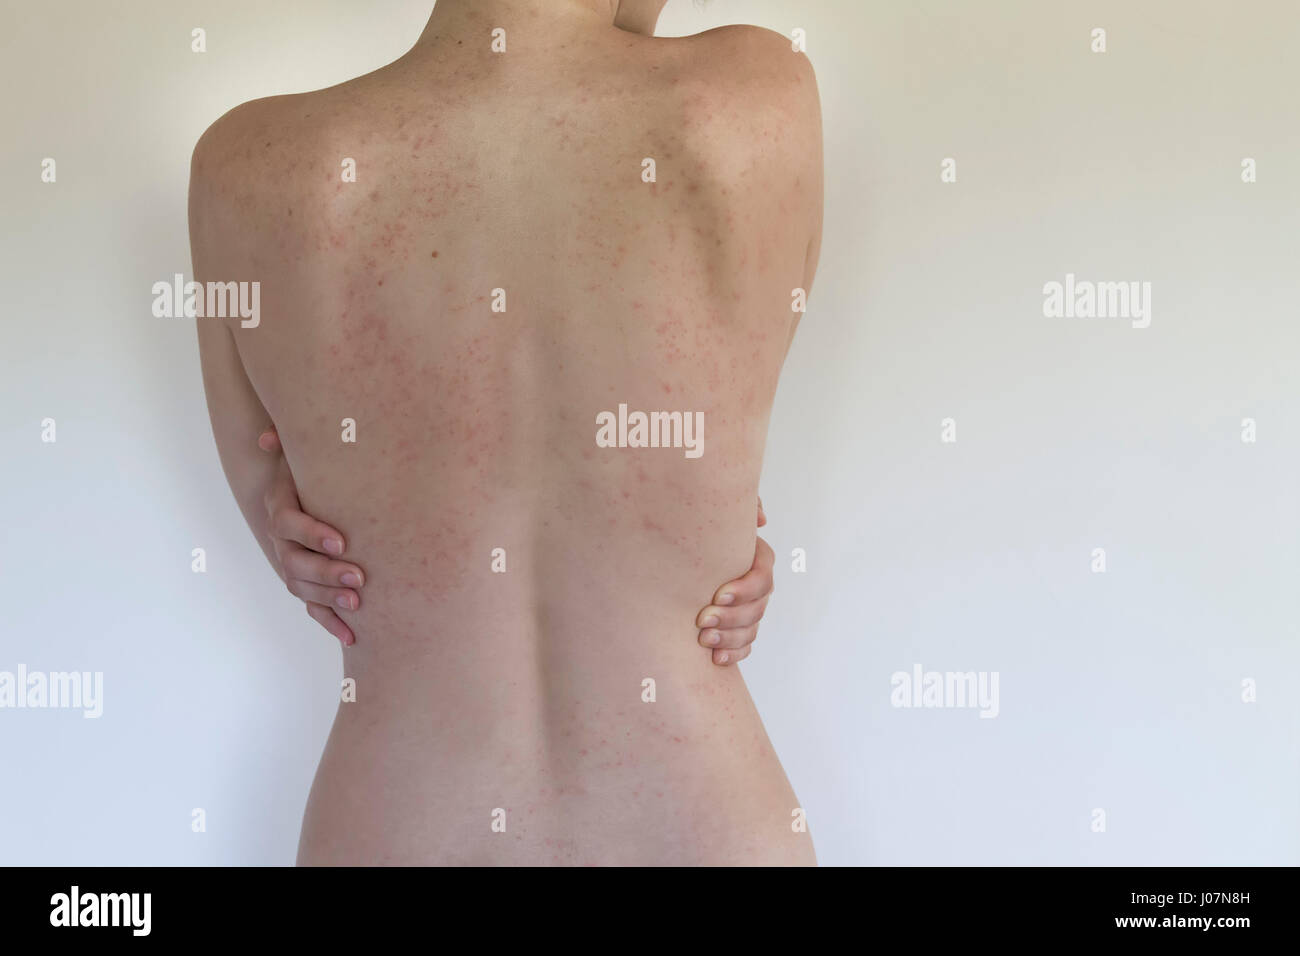 Allergy rash on back of woman isolated on white. Soft Focus Stock Photo